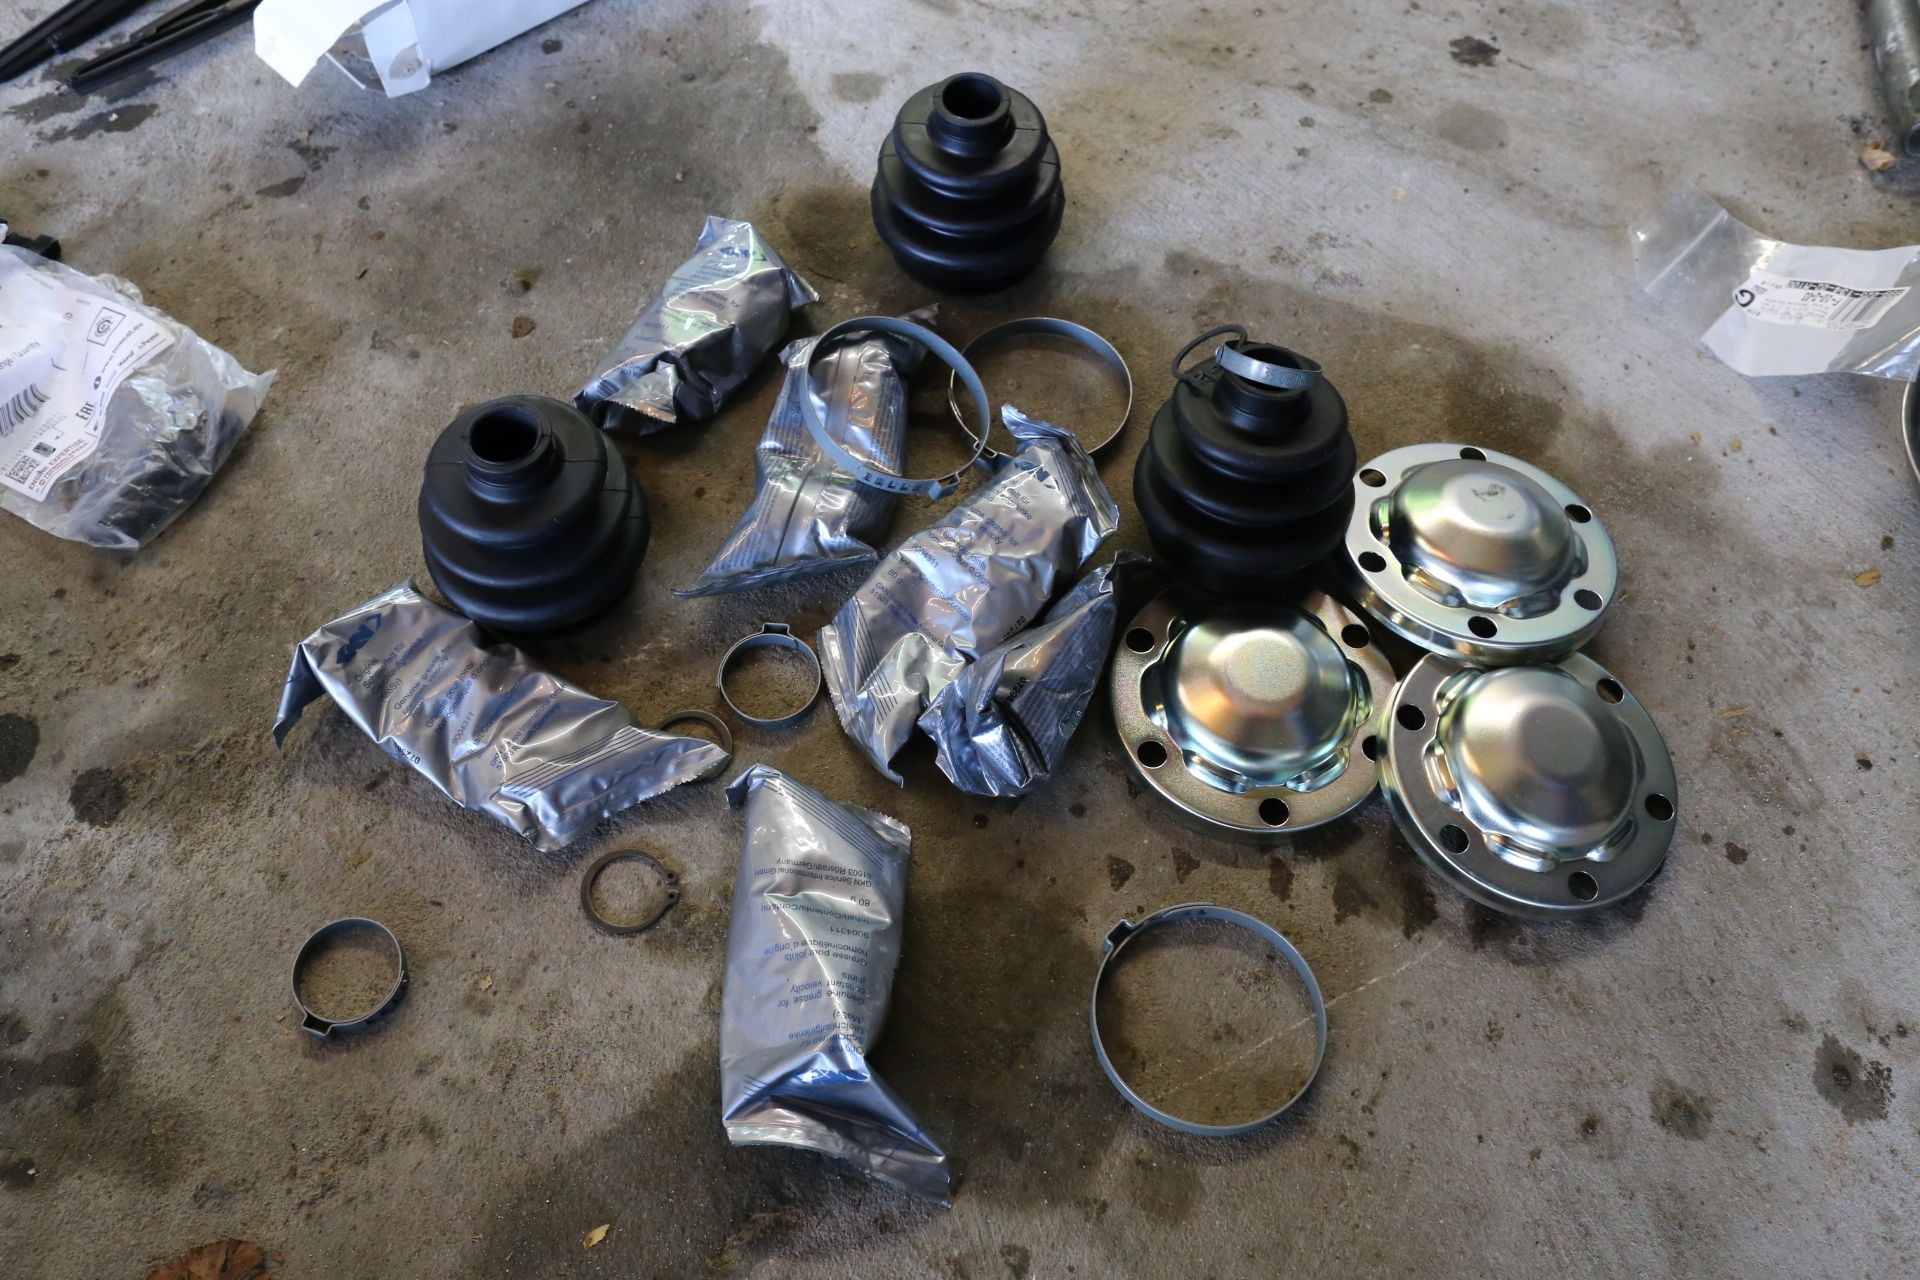 Miscellaneous - 993 4S Parts, Steer Knuckle, Tail Lights, Shifter Rods, AC Blower Motor, Brake Pads - Used - 1994 to 1998 Porsche 911 - Chicago, ID 60706, United States